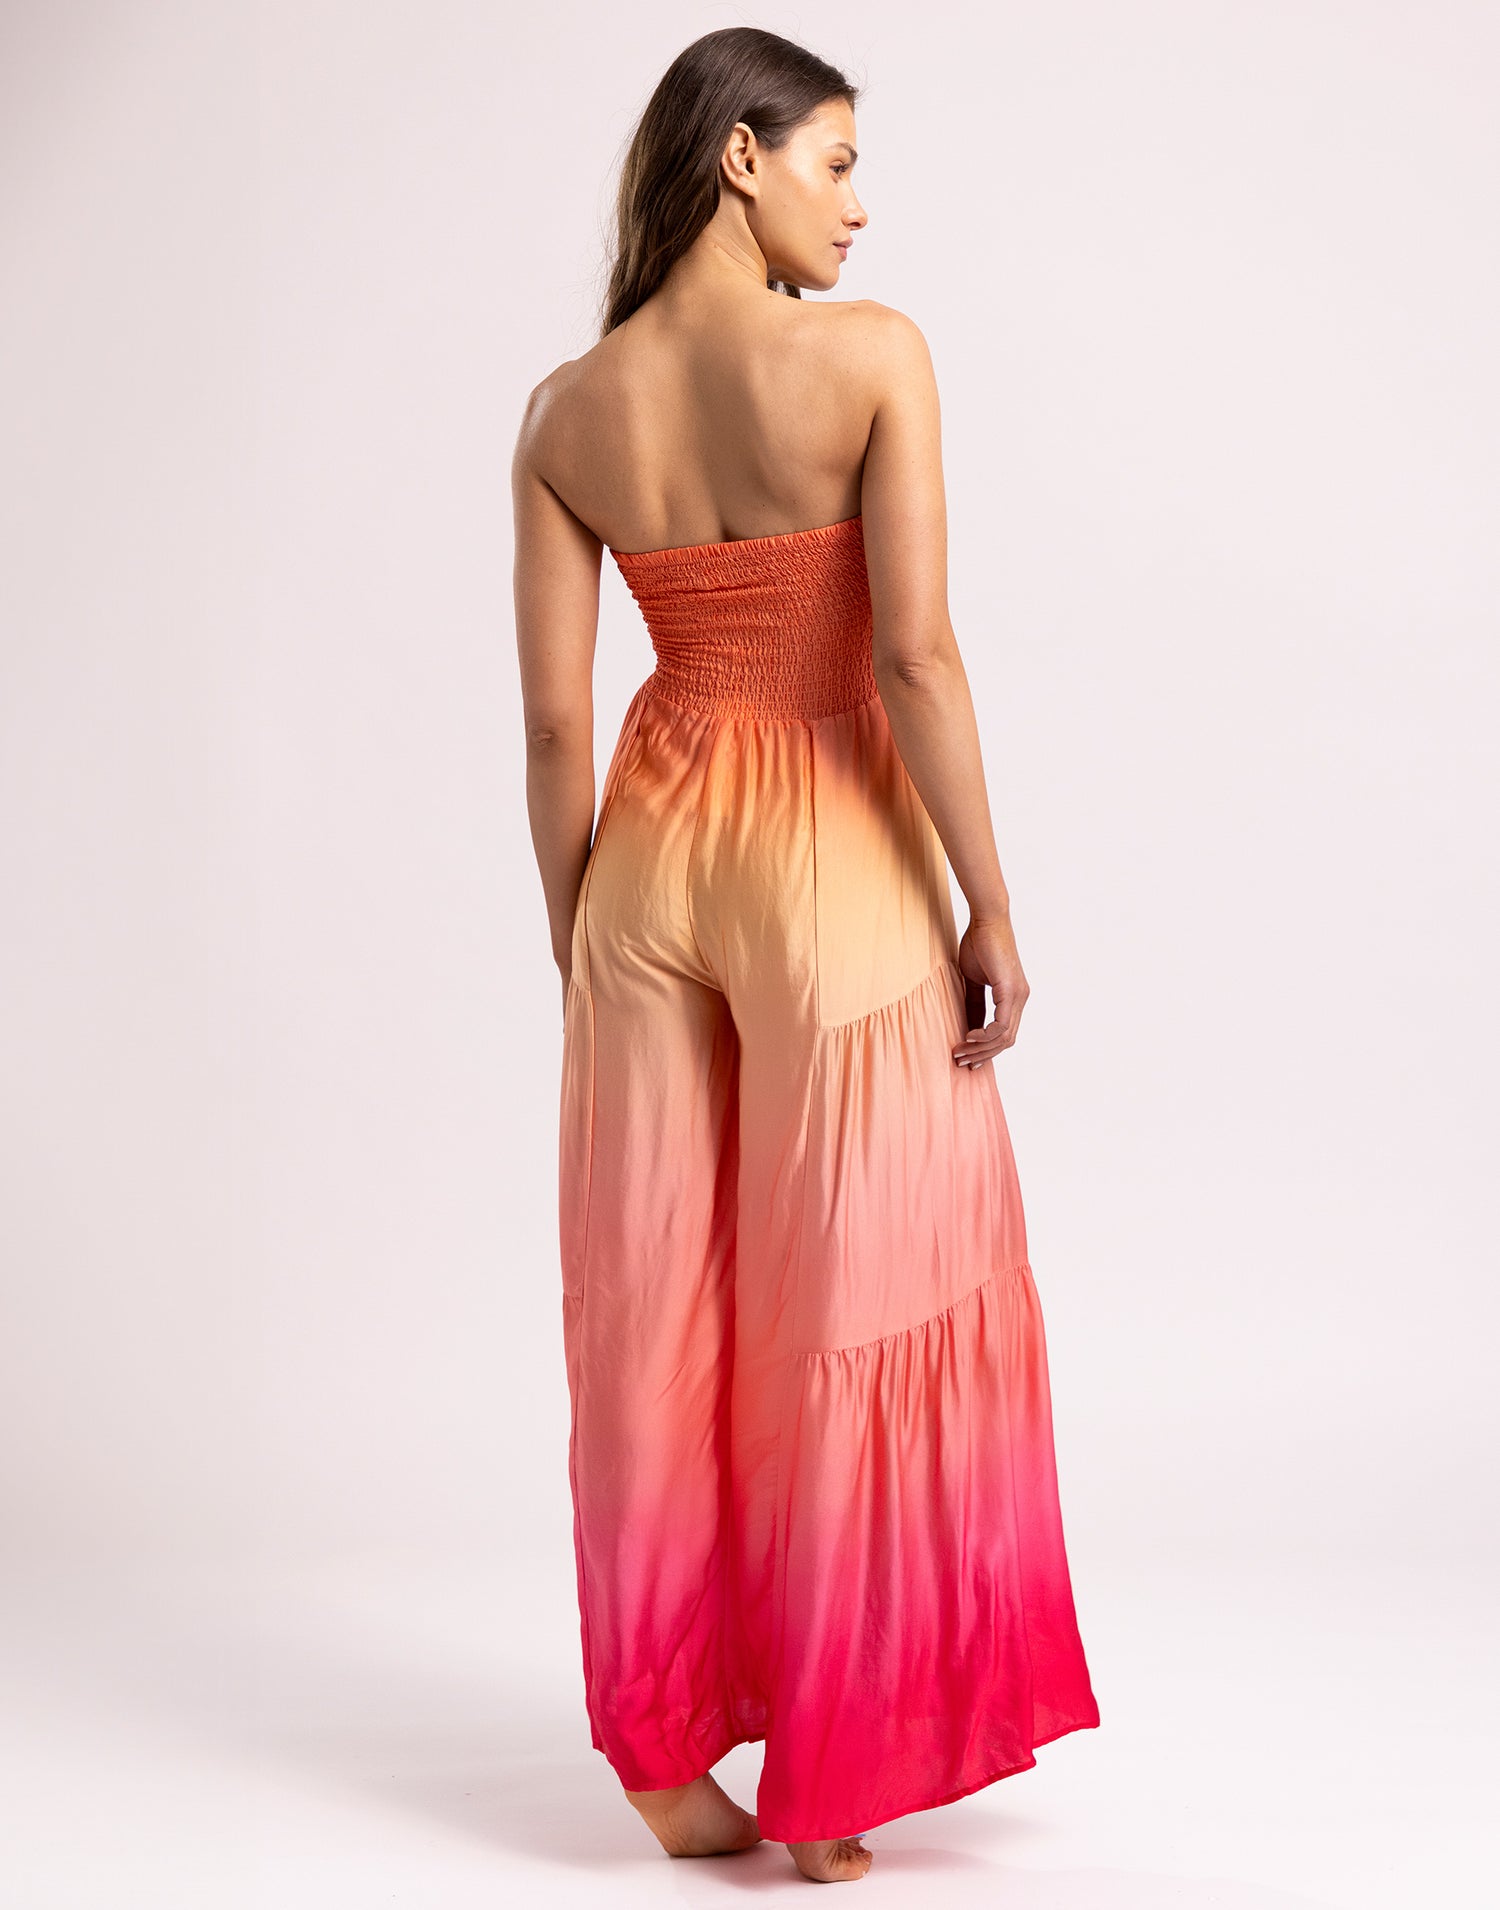 Dip Dye Jumpsuit in Sunset Ombre - Alternate Back View